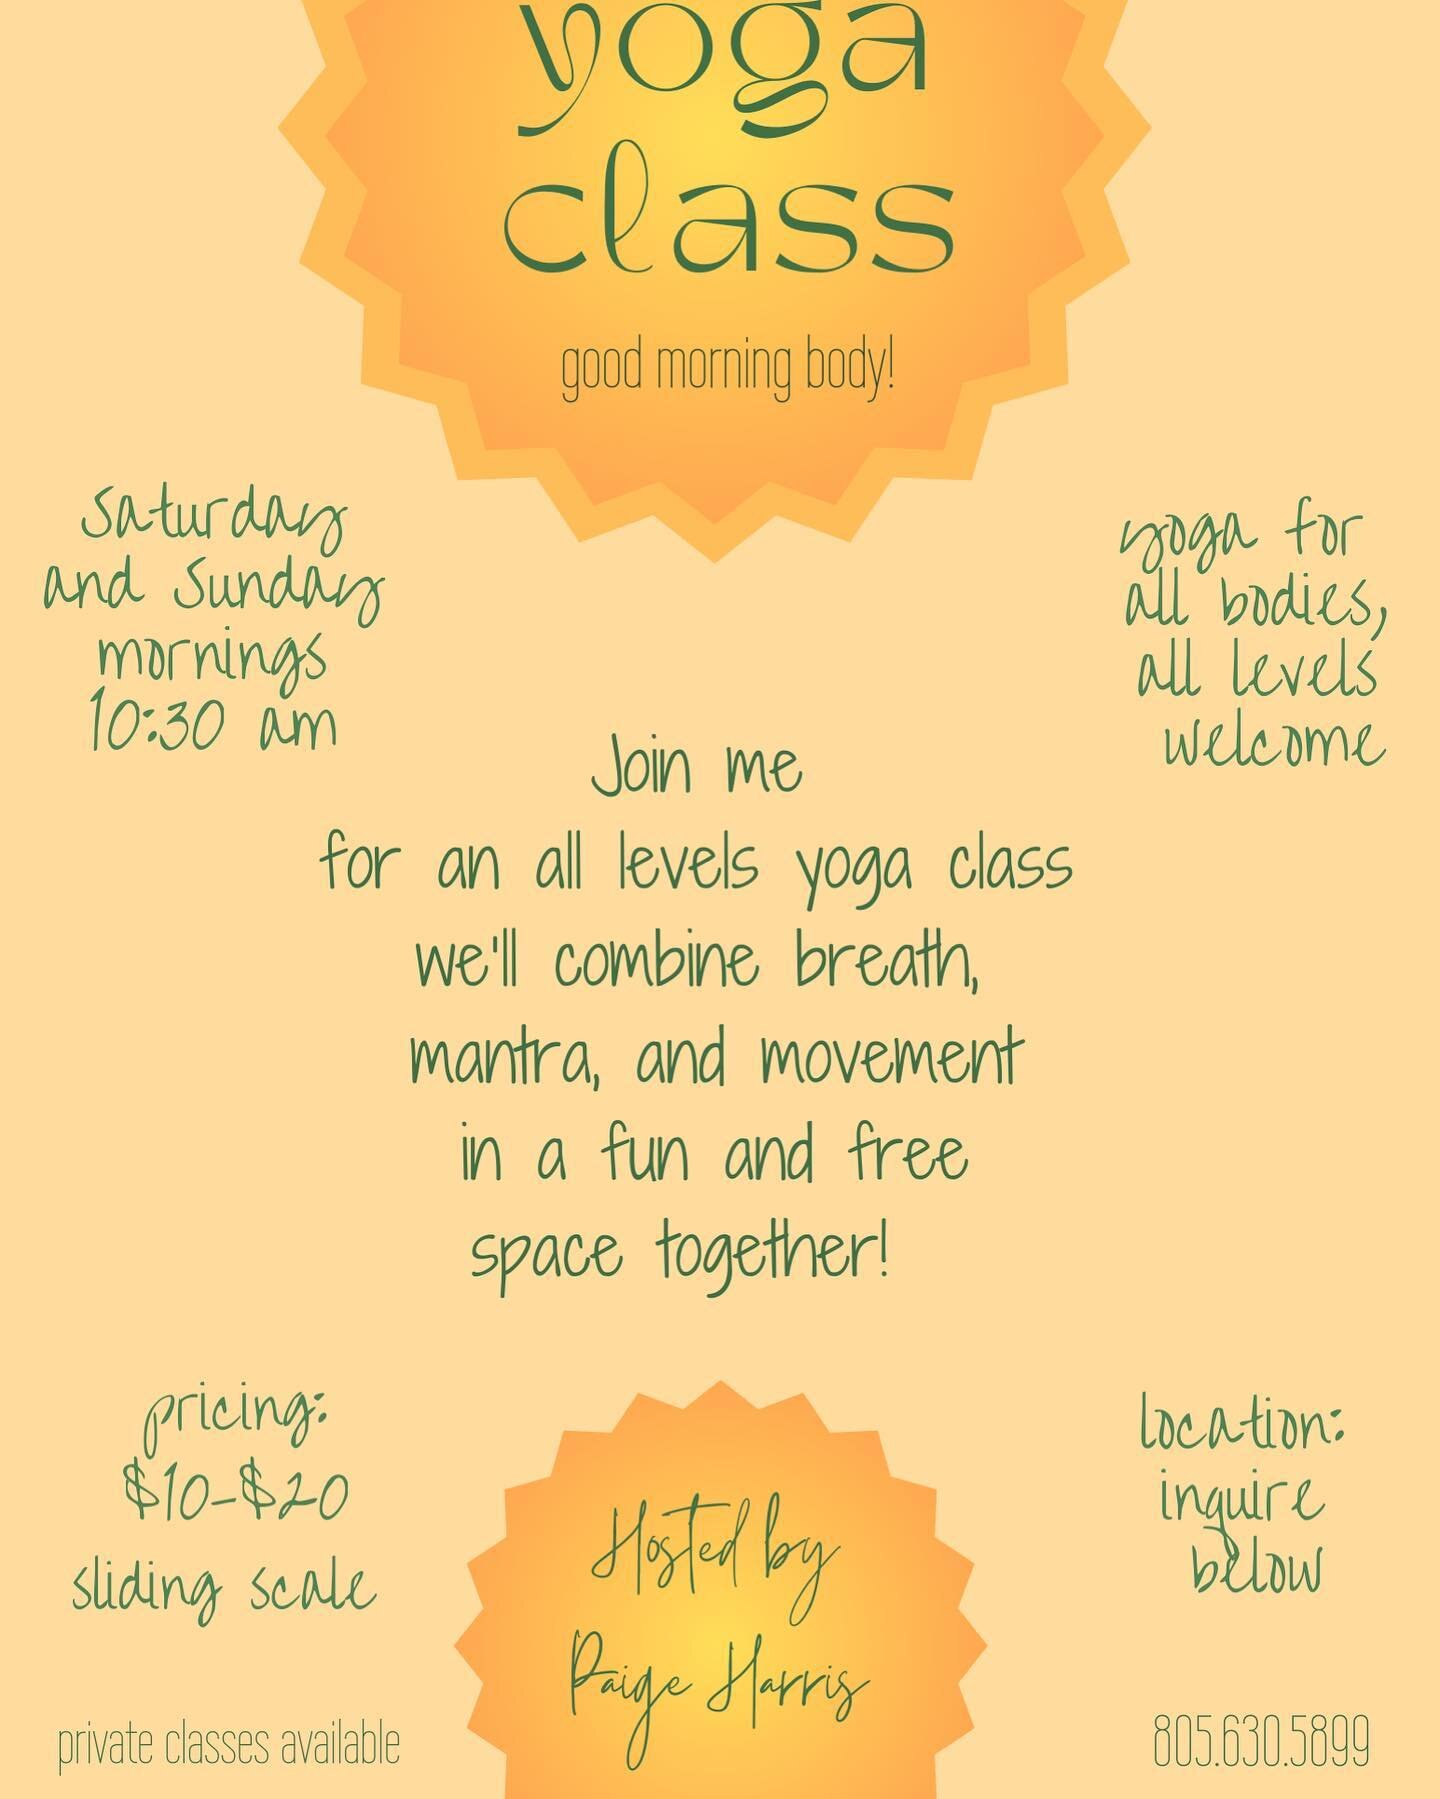 Teaching my first official yoga class to you all this weekend! Can&rsquo;t wait to see you there! 

Message me for details!

12/9 + 12/10
10:30 AM